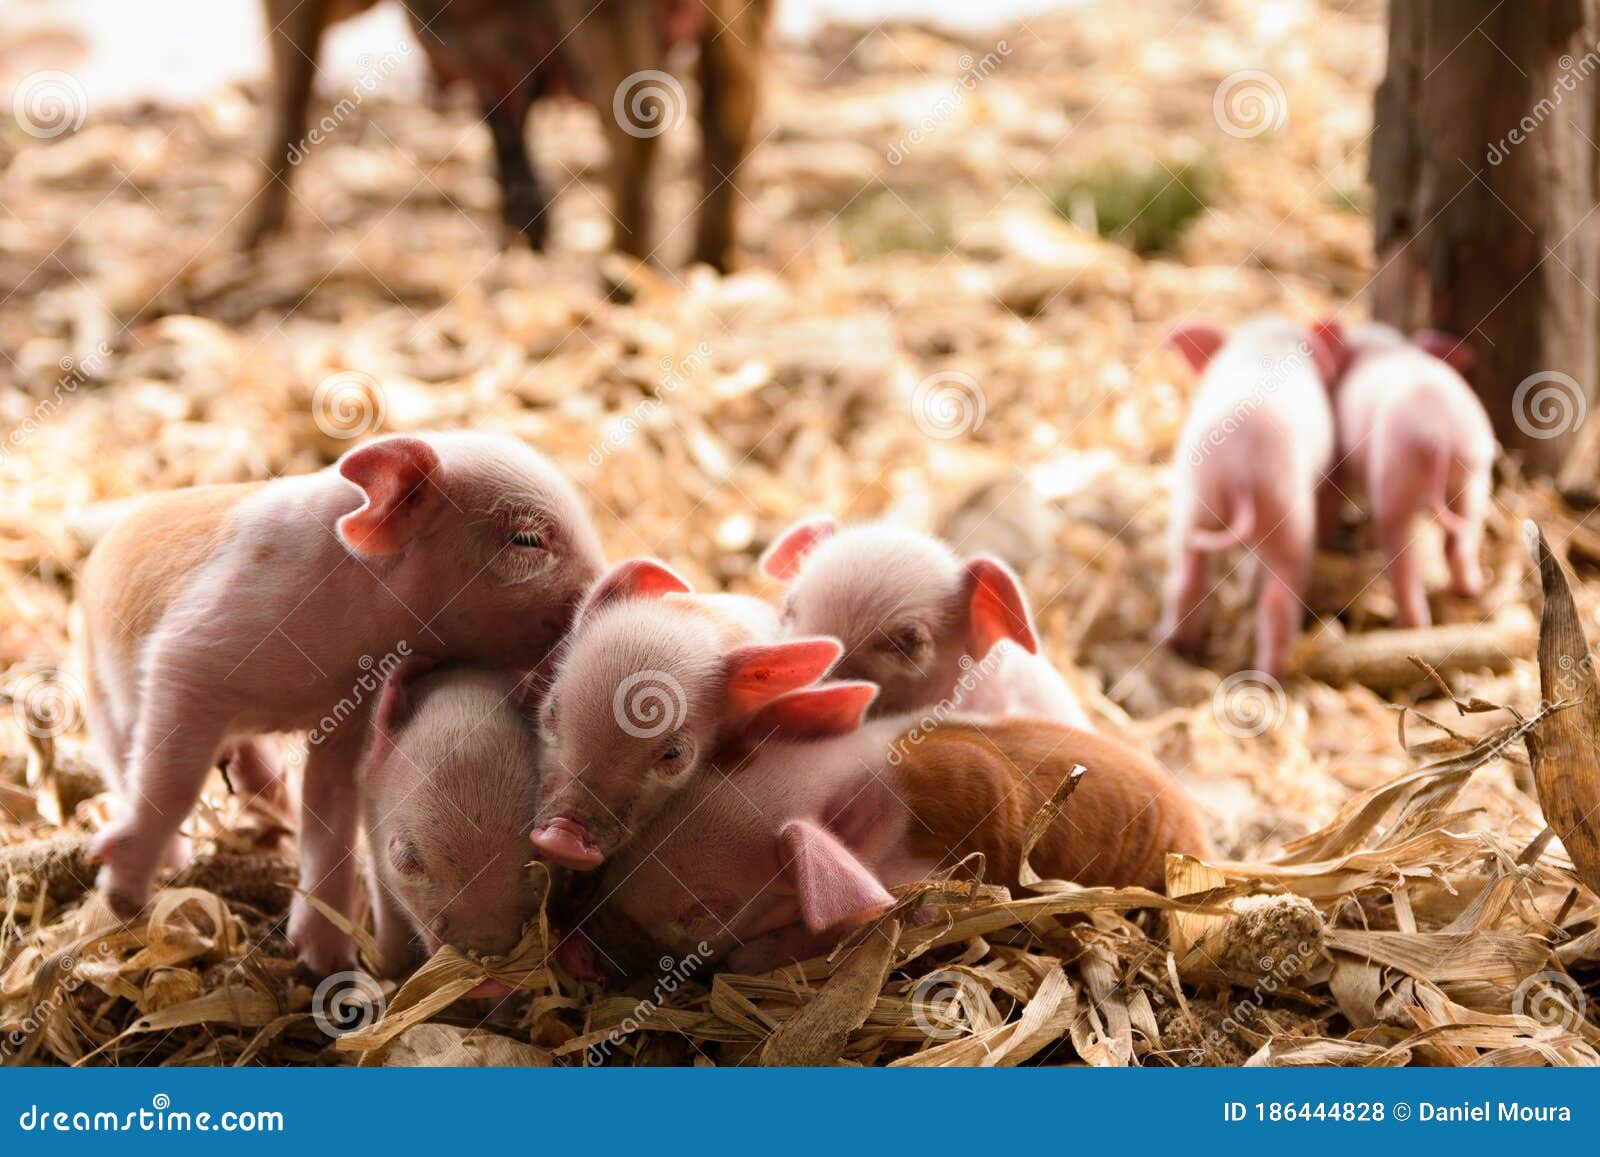 pink piglets, newly born on the farm